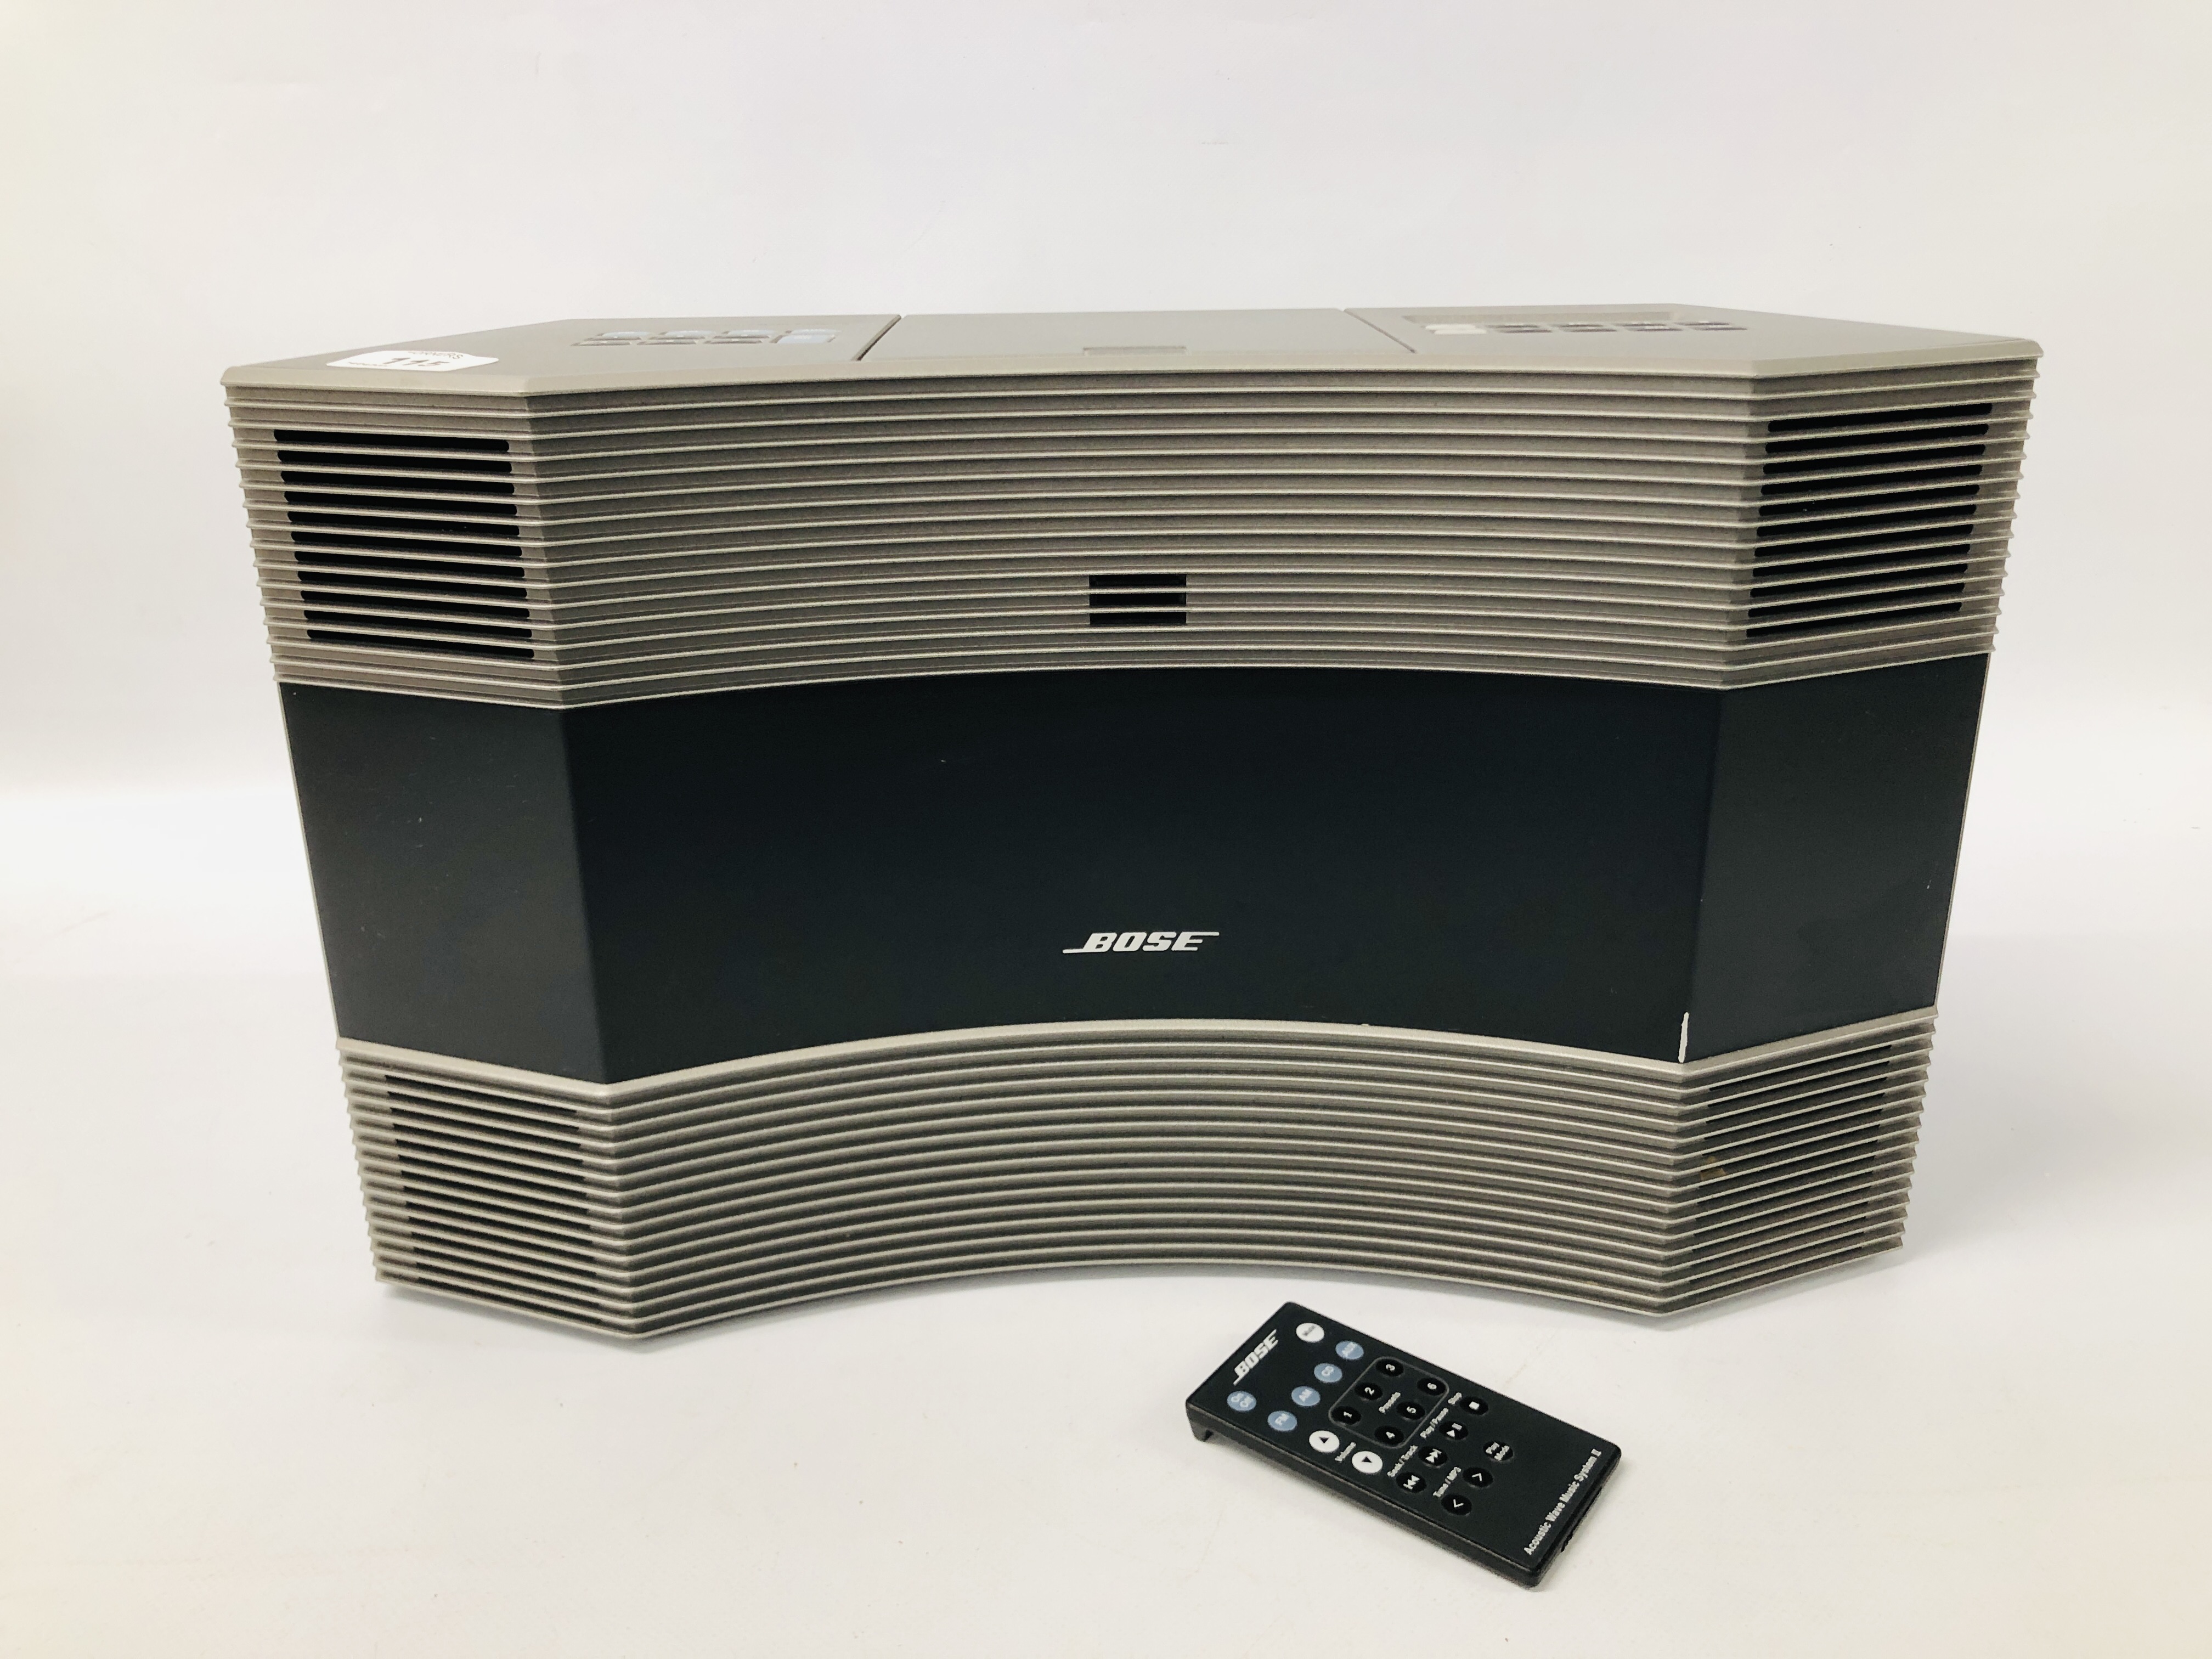 BOSE ACOUSTIC WAVE MUSIC SYSTEM 2 WITH REMOTE - SOLD AS SEEN